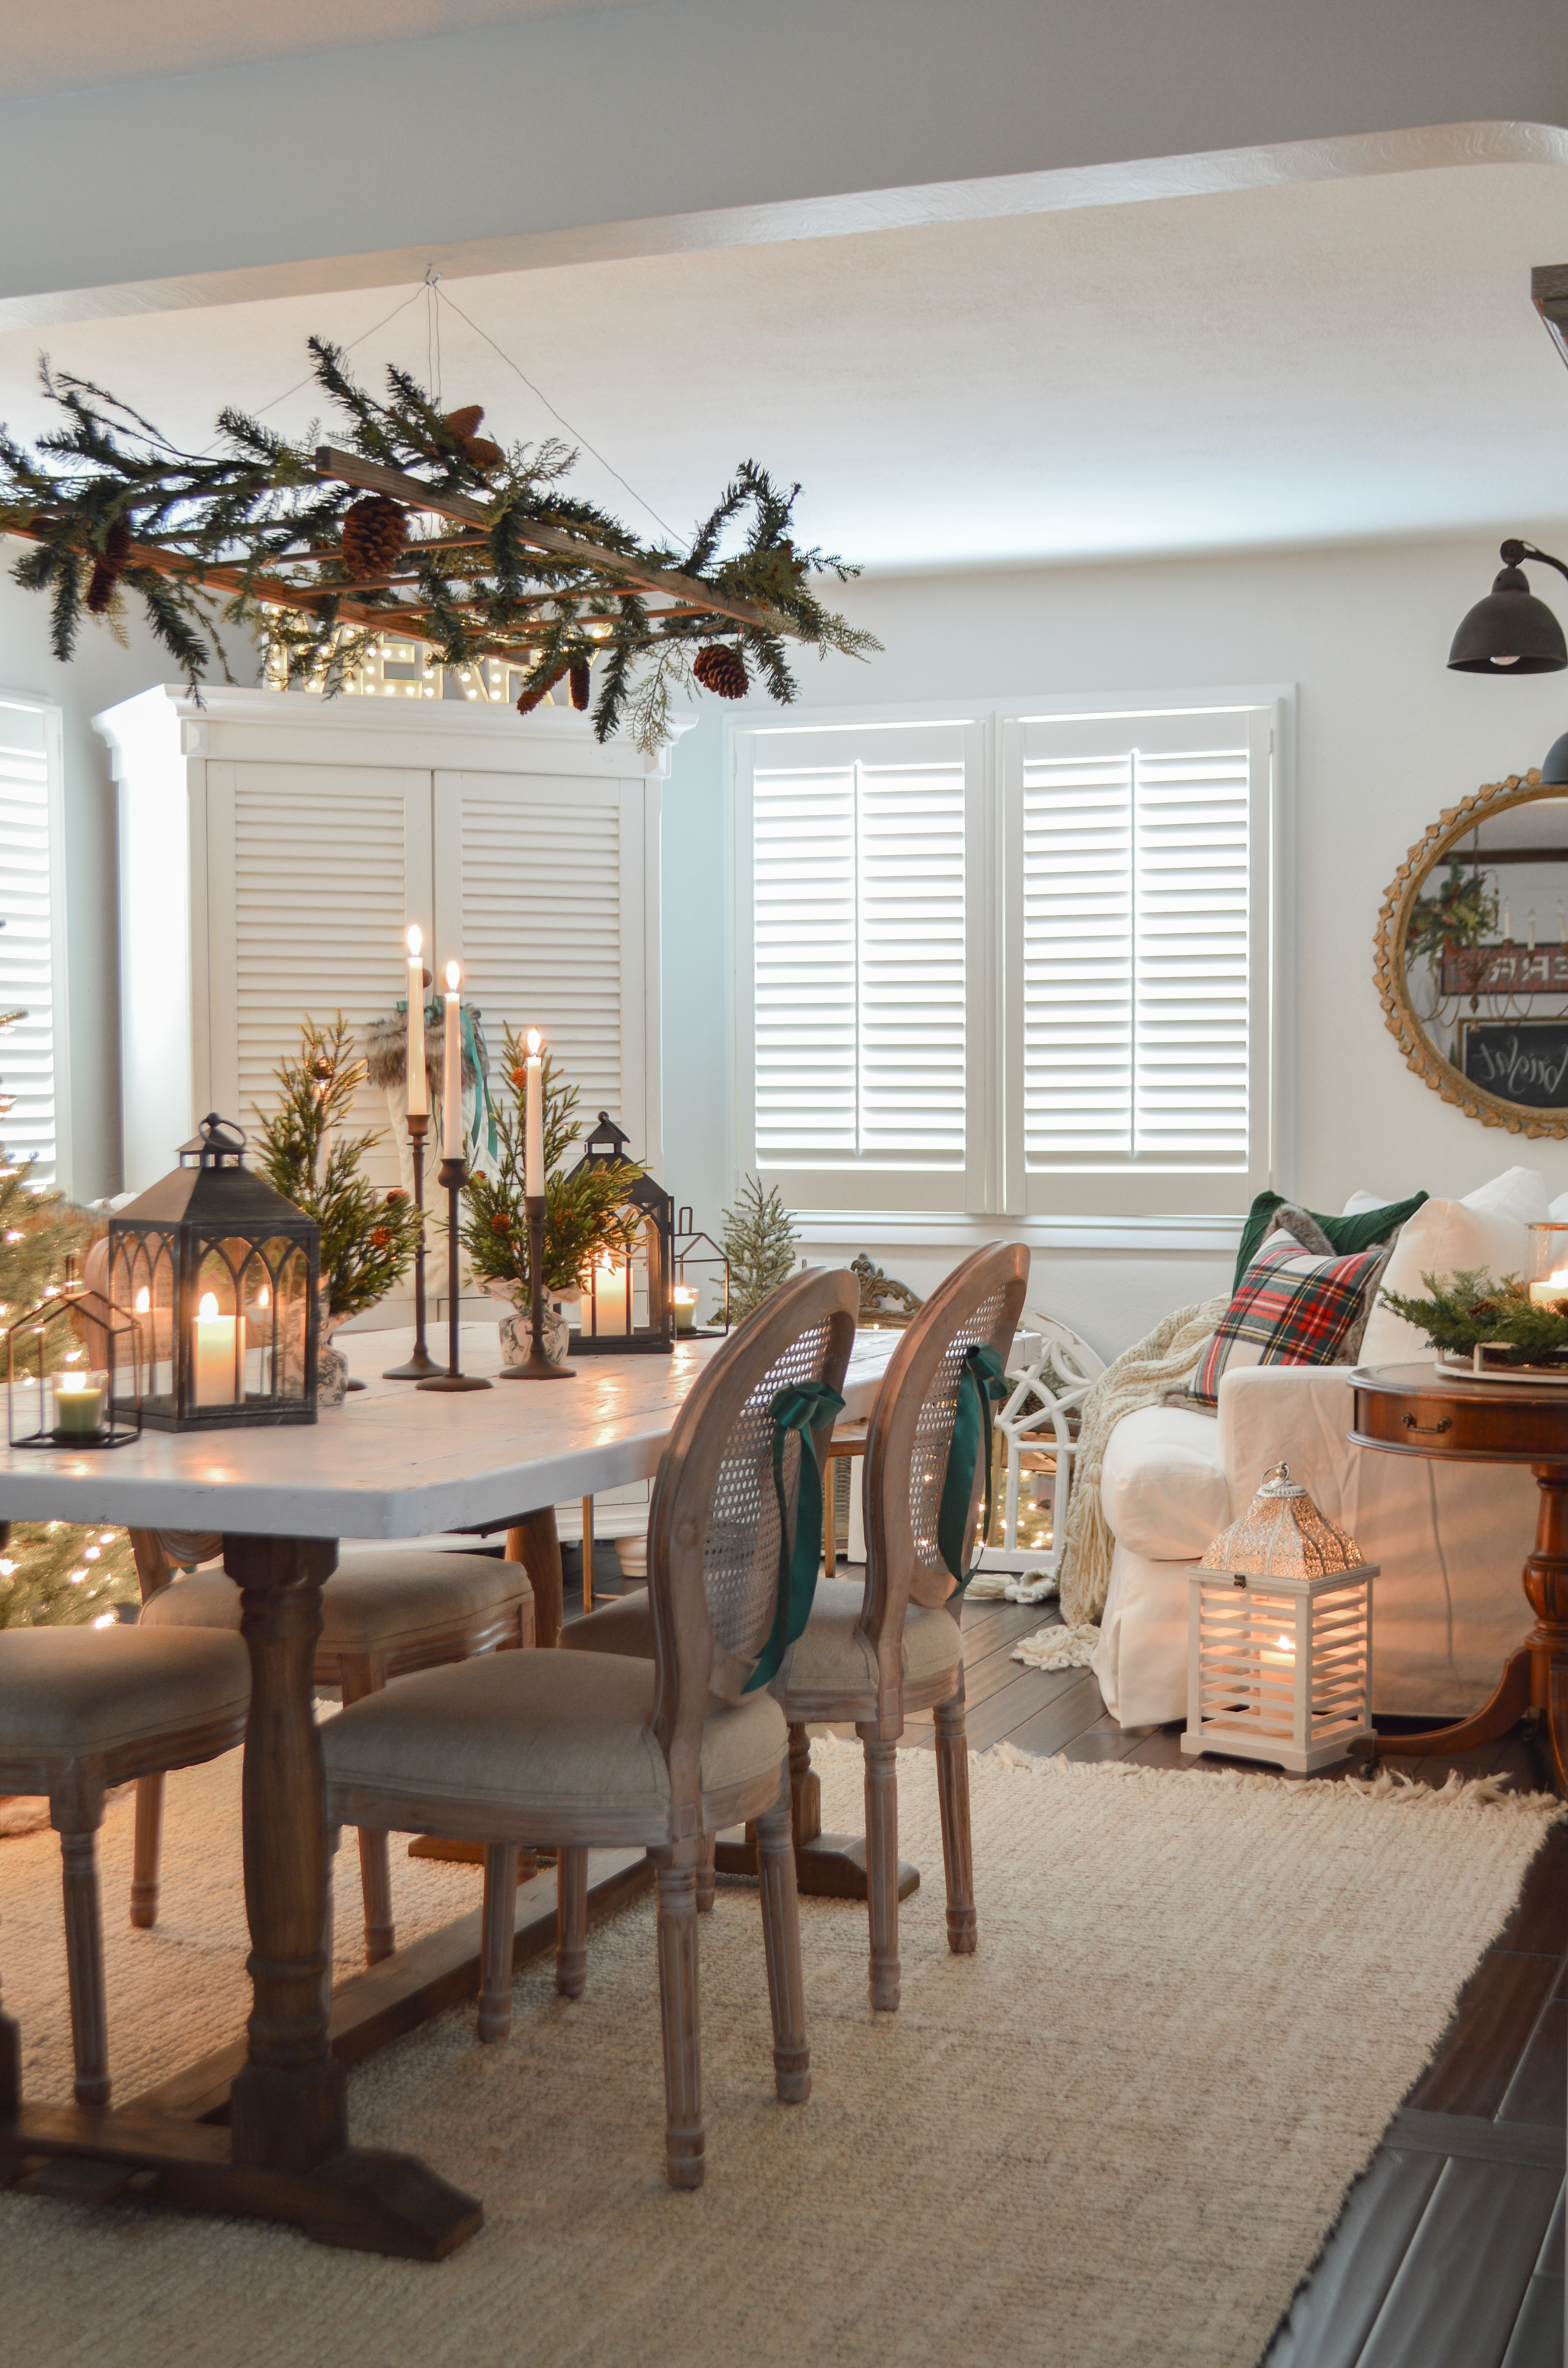 Holiday Housewalk Merry Christmas Home Tour - Cozy little 1920's cottage home decorated for Christmastime - full of affordable, easy ideas, vintage finds and DIY projects! #holidayhousewalk #christmashometour #cozychristmas #cottagechristmas #farmhousechristmas